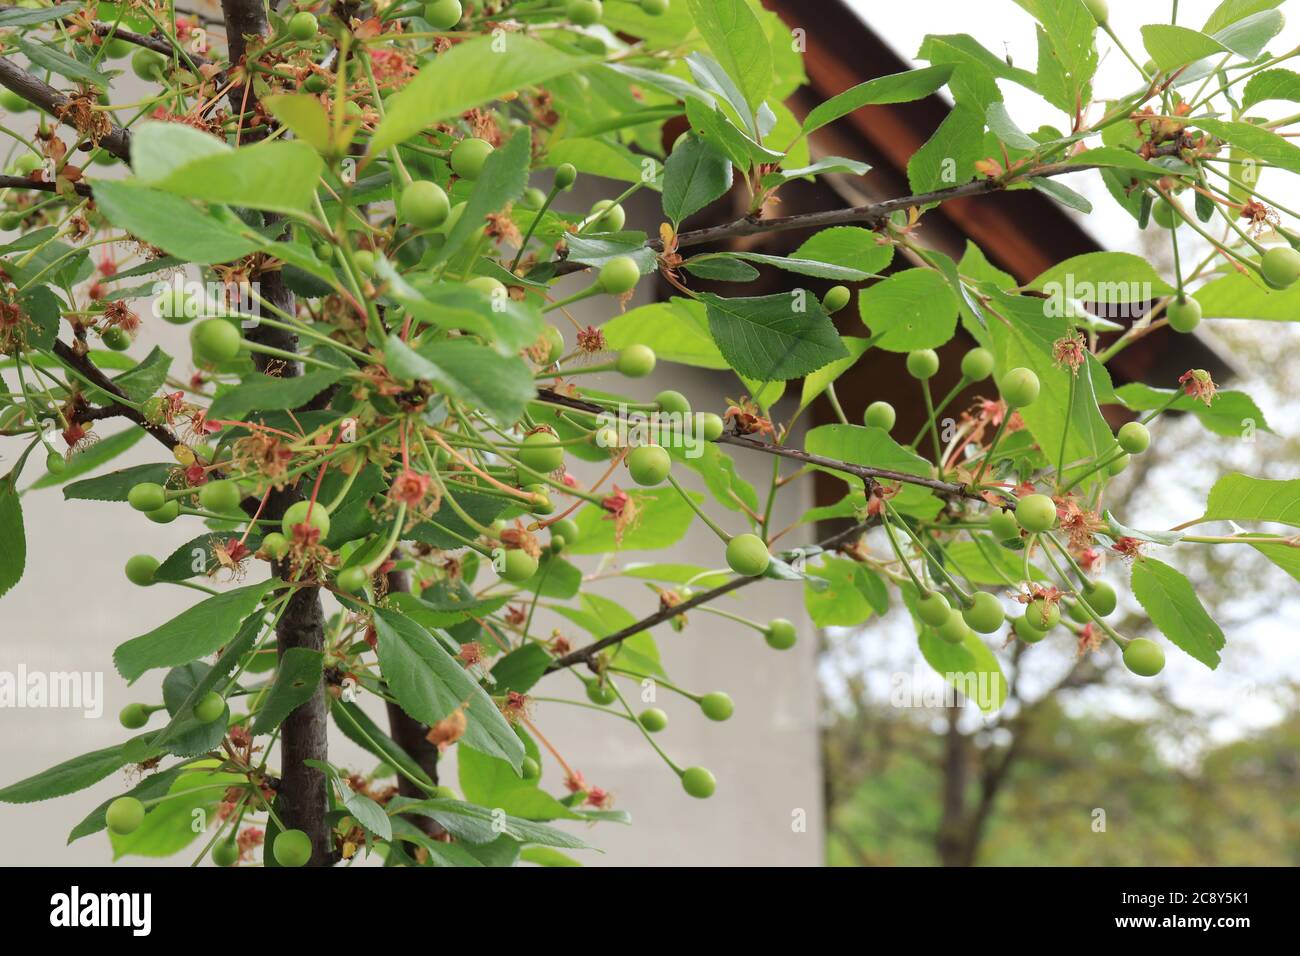 Green unripe cherries hanging on branches in cherry tree in natural light Stock Photo